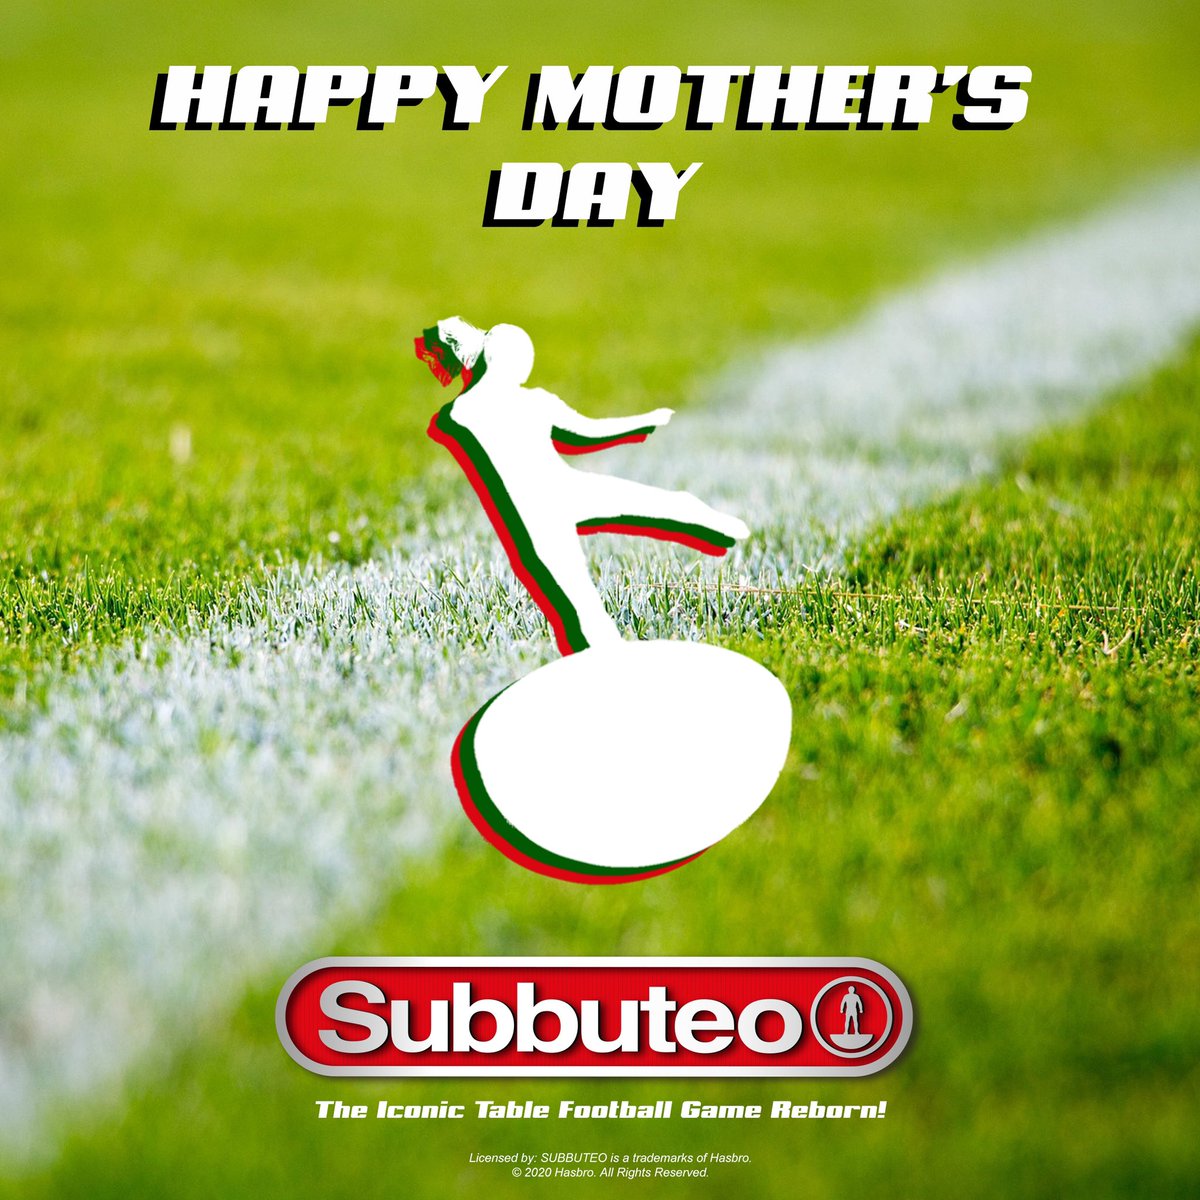 Wishing all the wonderful Mums in the UK and across the world, a very Happy Mother’s Day #mothersday #happymothersday #happymothersday2023 #subbuteo